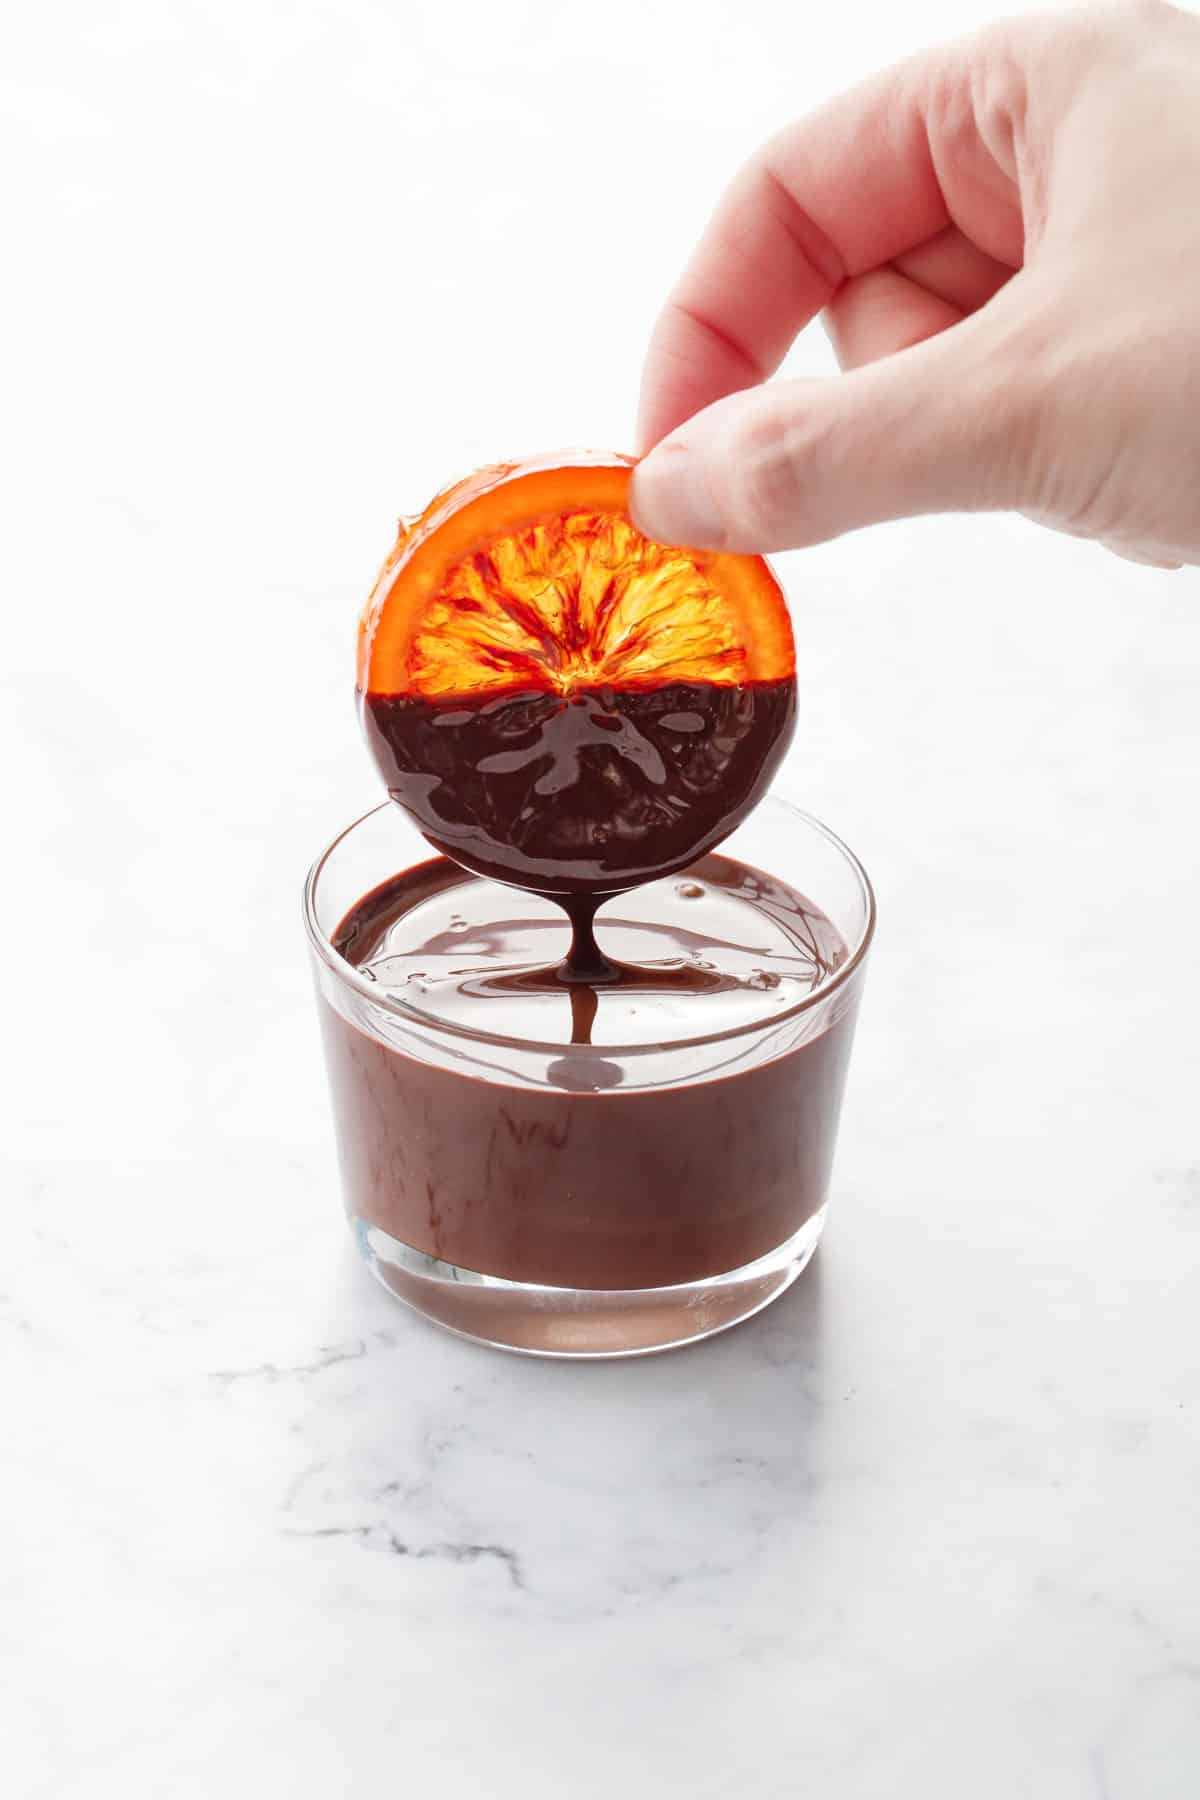 Hand dipping a glass-like transparent slice of candied blood orange into a small glass of melted dark chocolate.